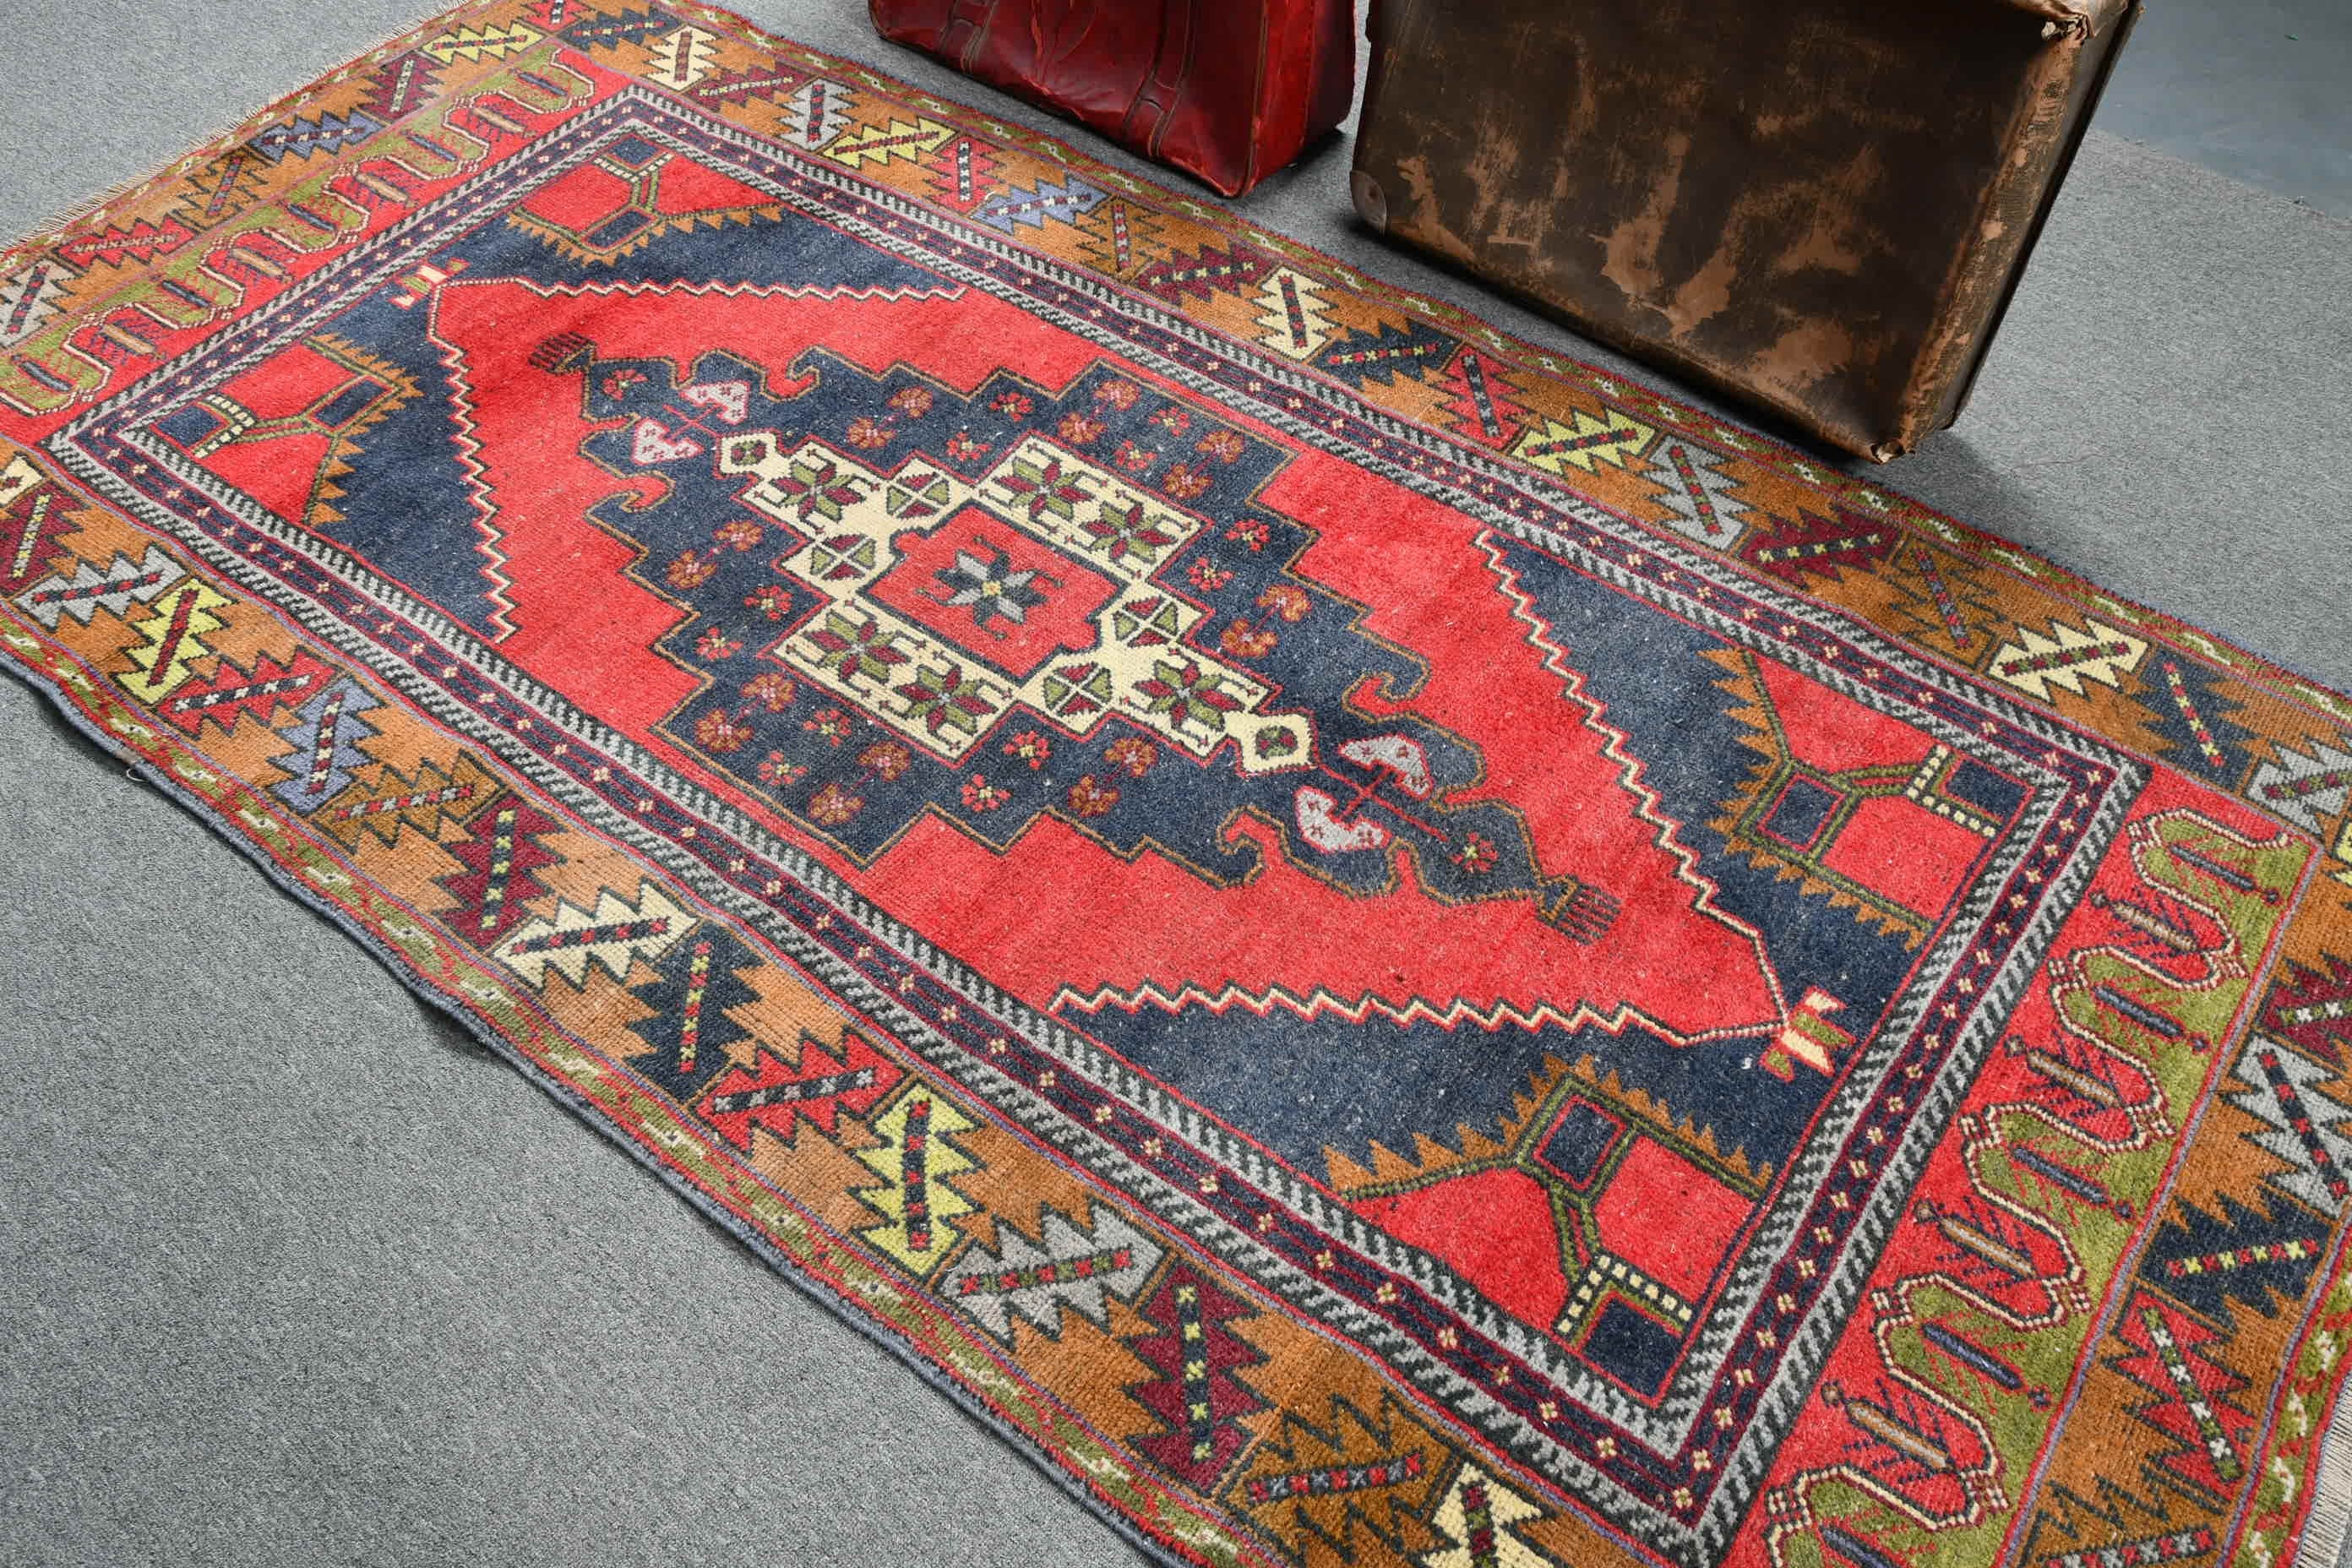 Anatolian Rugs, Cute Rugs, 4.1x8.3 ft Area Rugs, Antique Rug, Turkish Rugs, Vintage Rugs, Nursery Rugs, Kitchen Rug, Red Antique Rugs